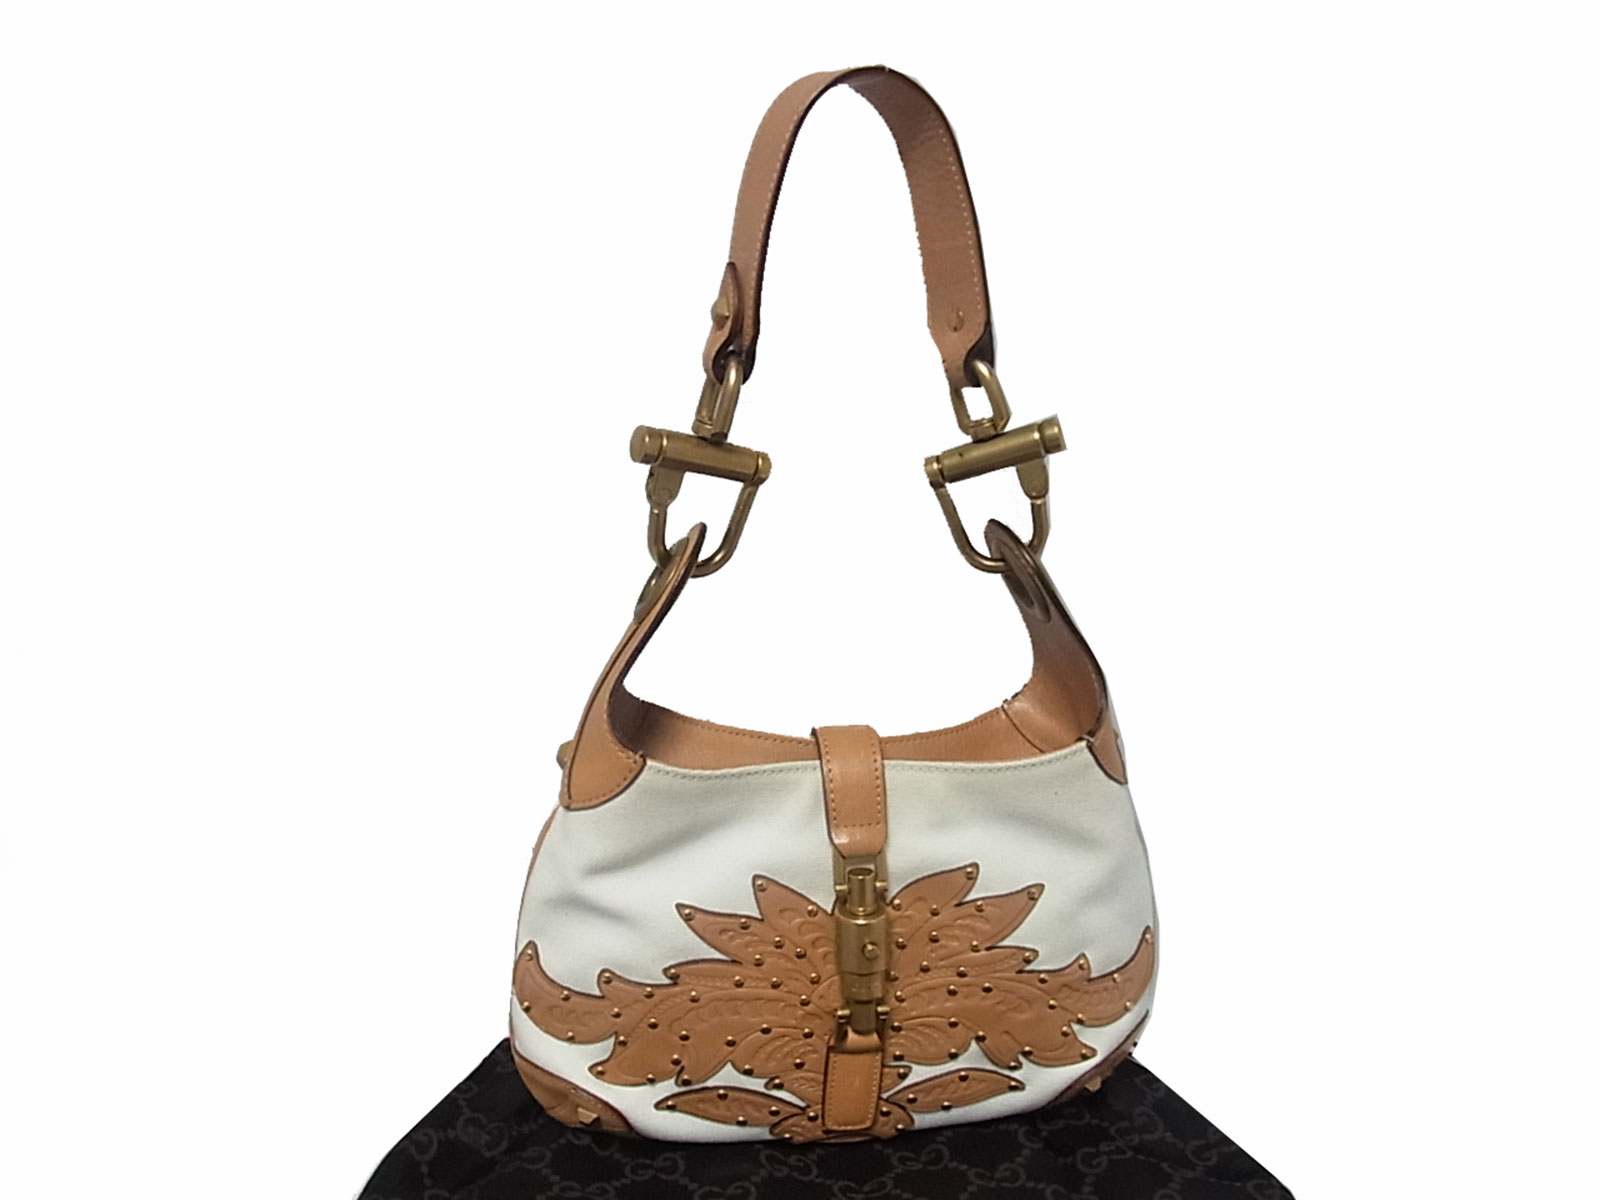 Auth GUCCI Jackie Small Handbag Beige/Brown Canvas/Leather Gold - e11792 | eBay